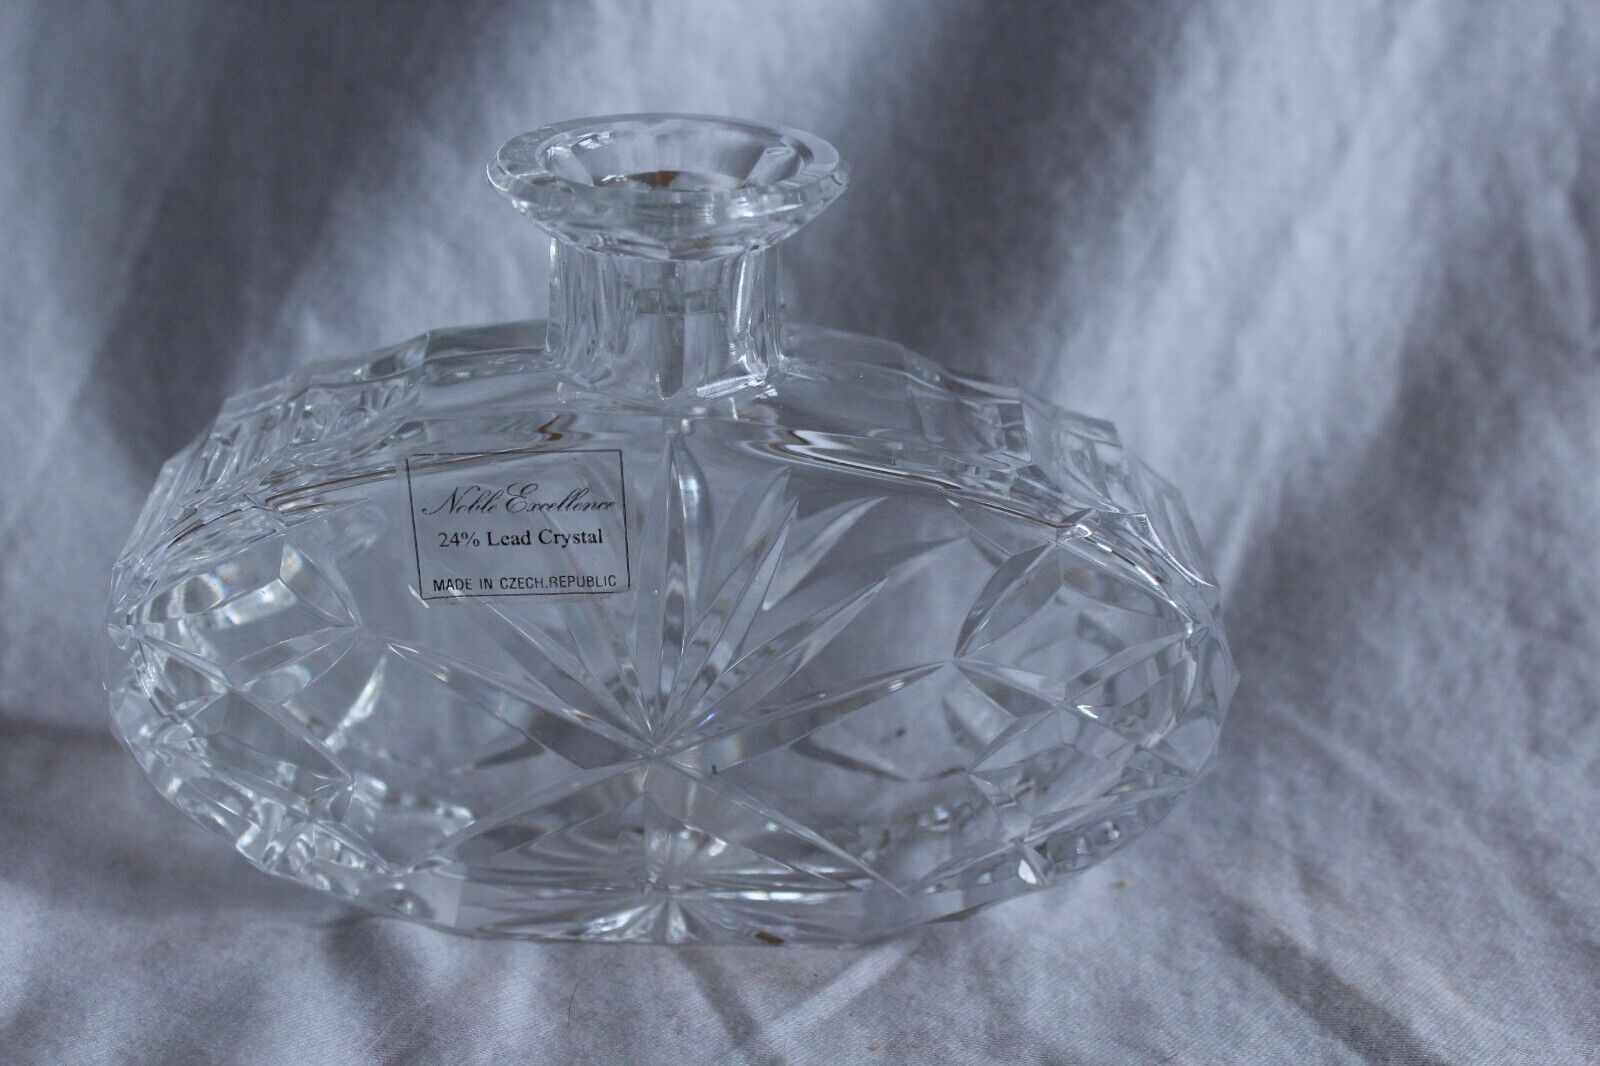 Vintage Noble Excellence 24% Lead Crystal Decanter